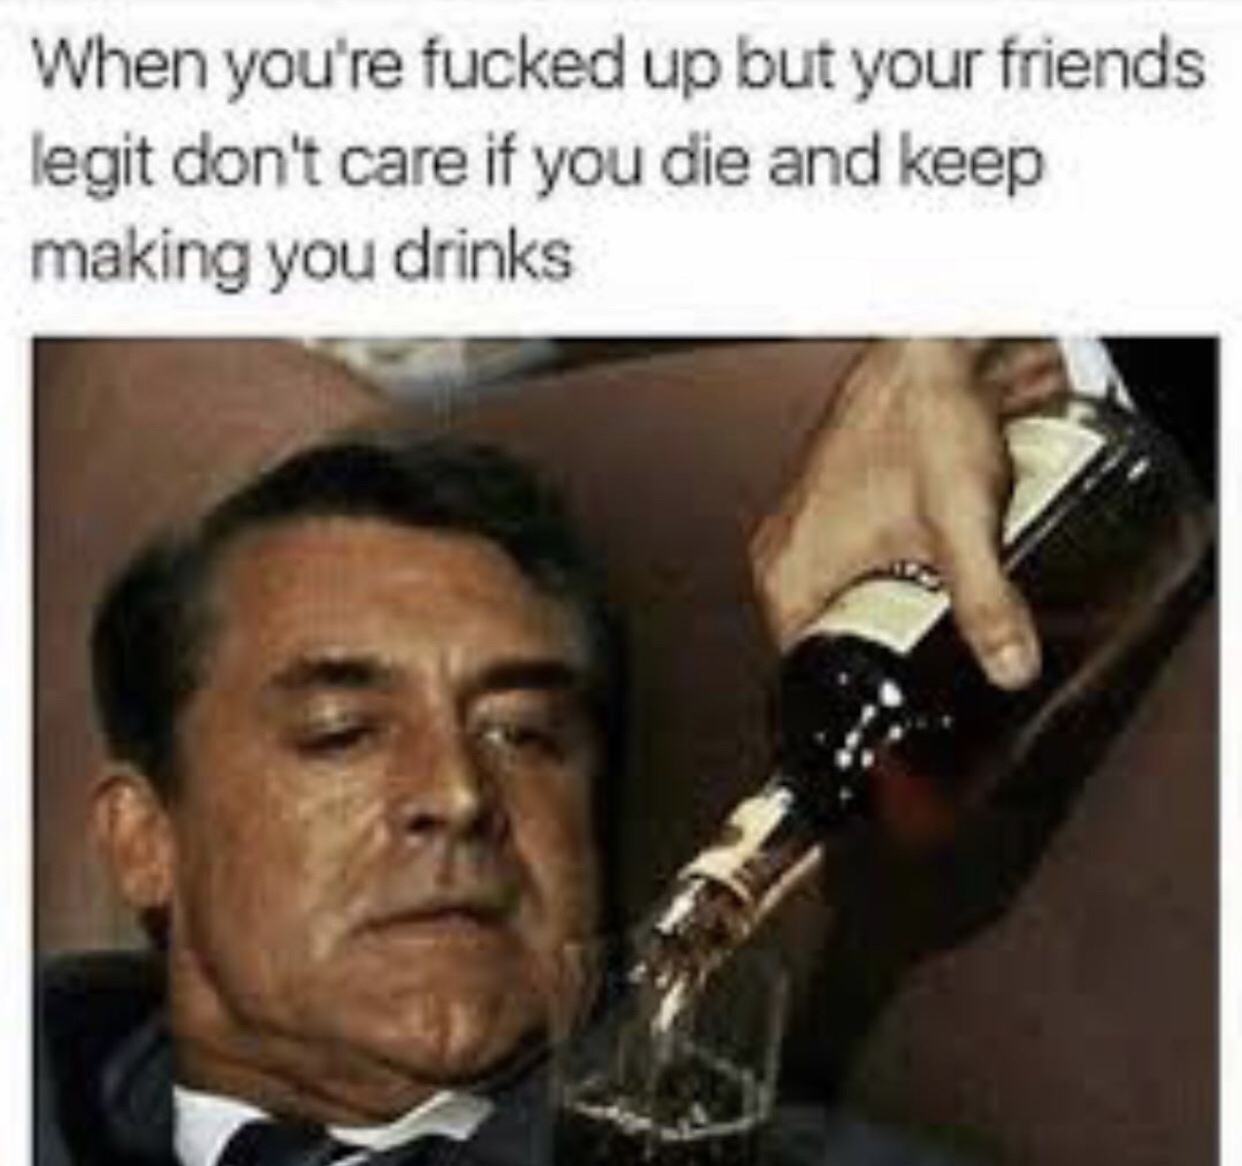 alcohol poisoning meme - When you're fucked up but your friends legit don't care if you die and keep making you drinks